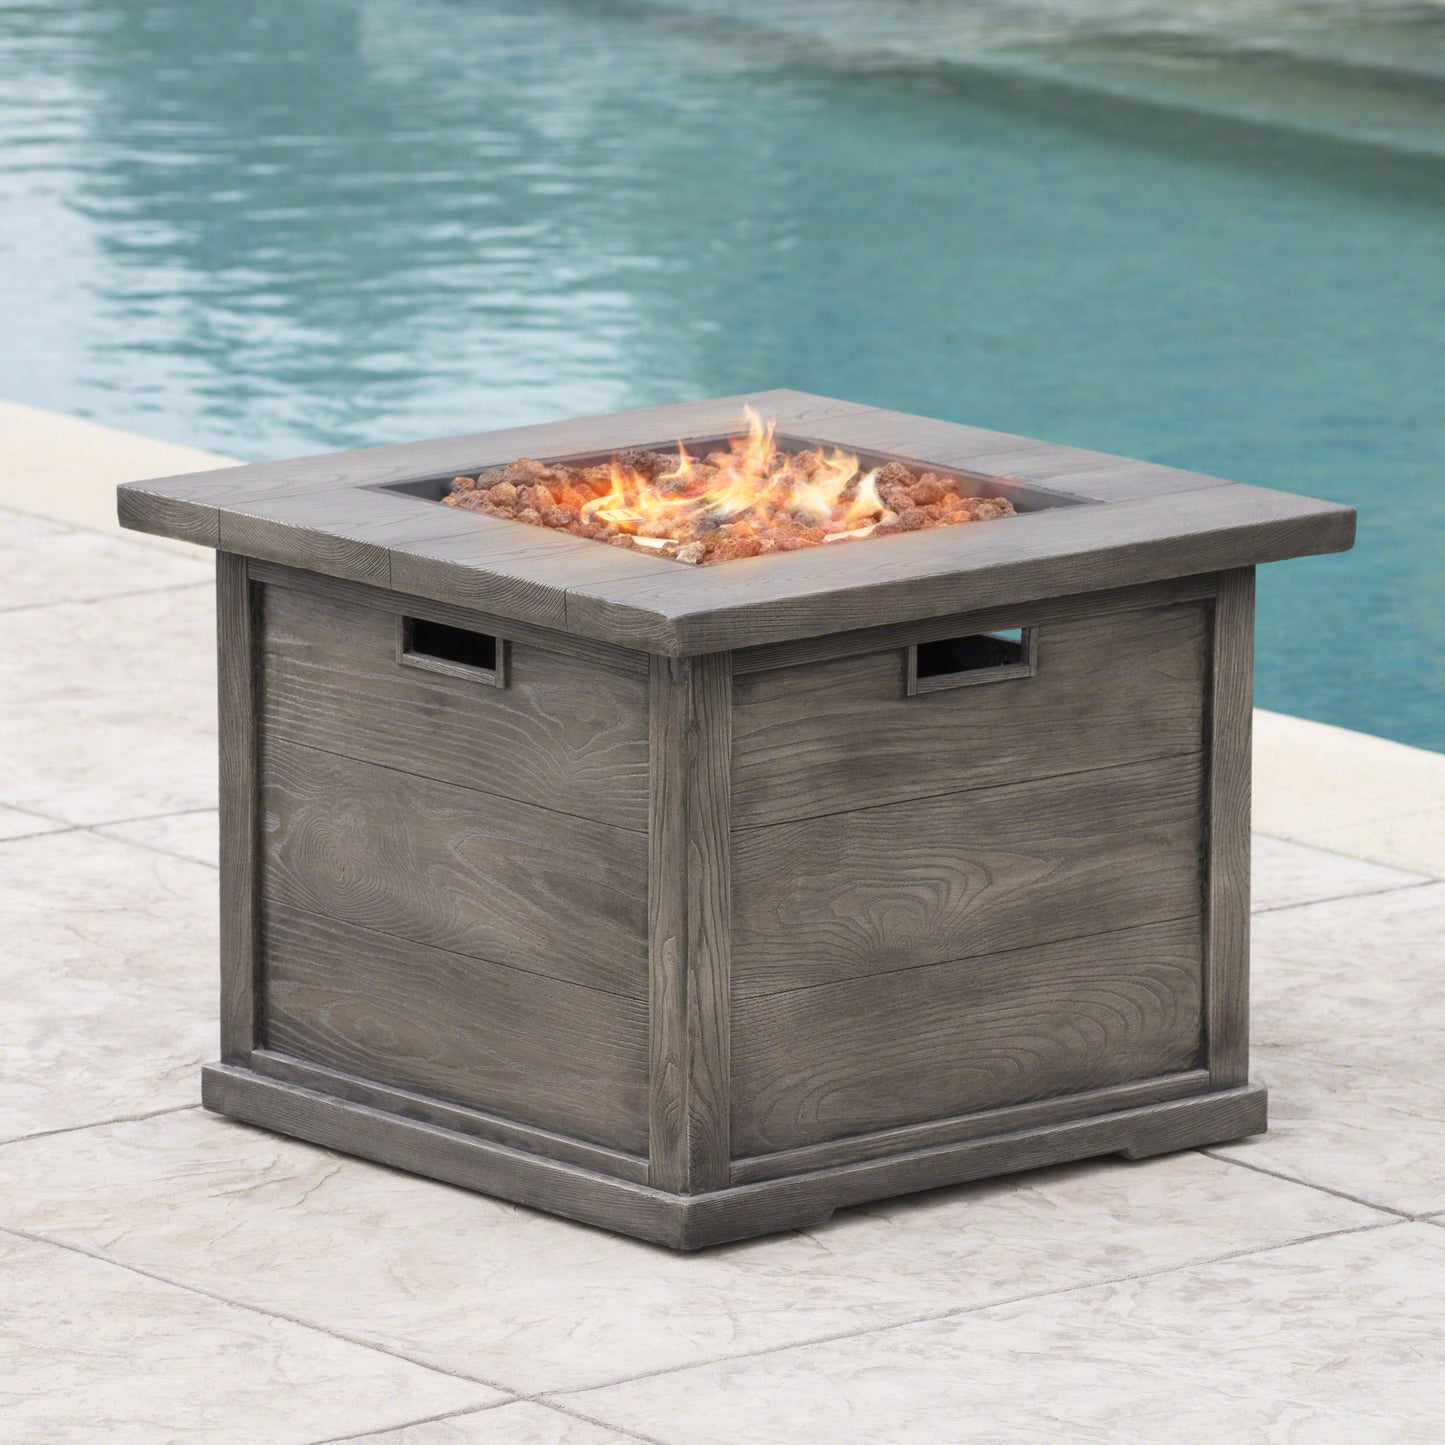 Ellesmere Outdoor Wood Patterned Square Gas Fire Pit